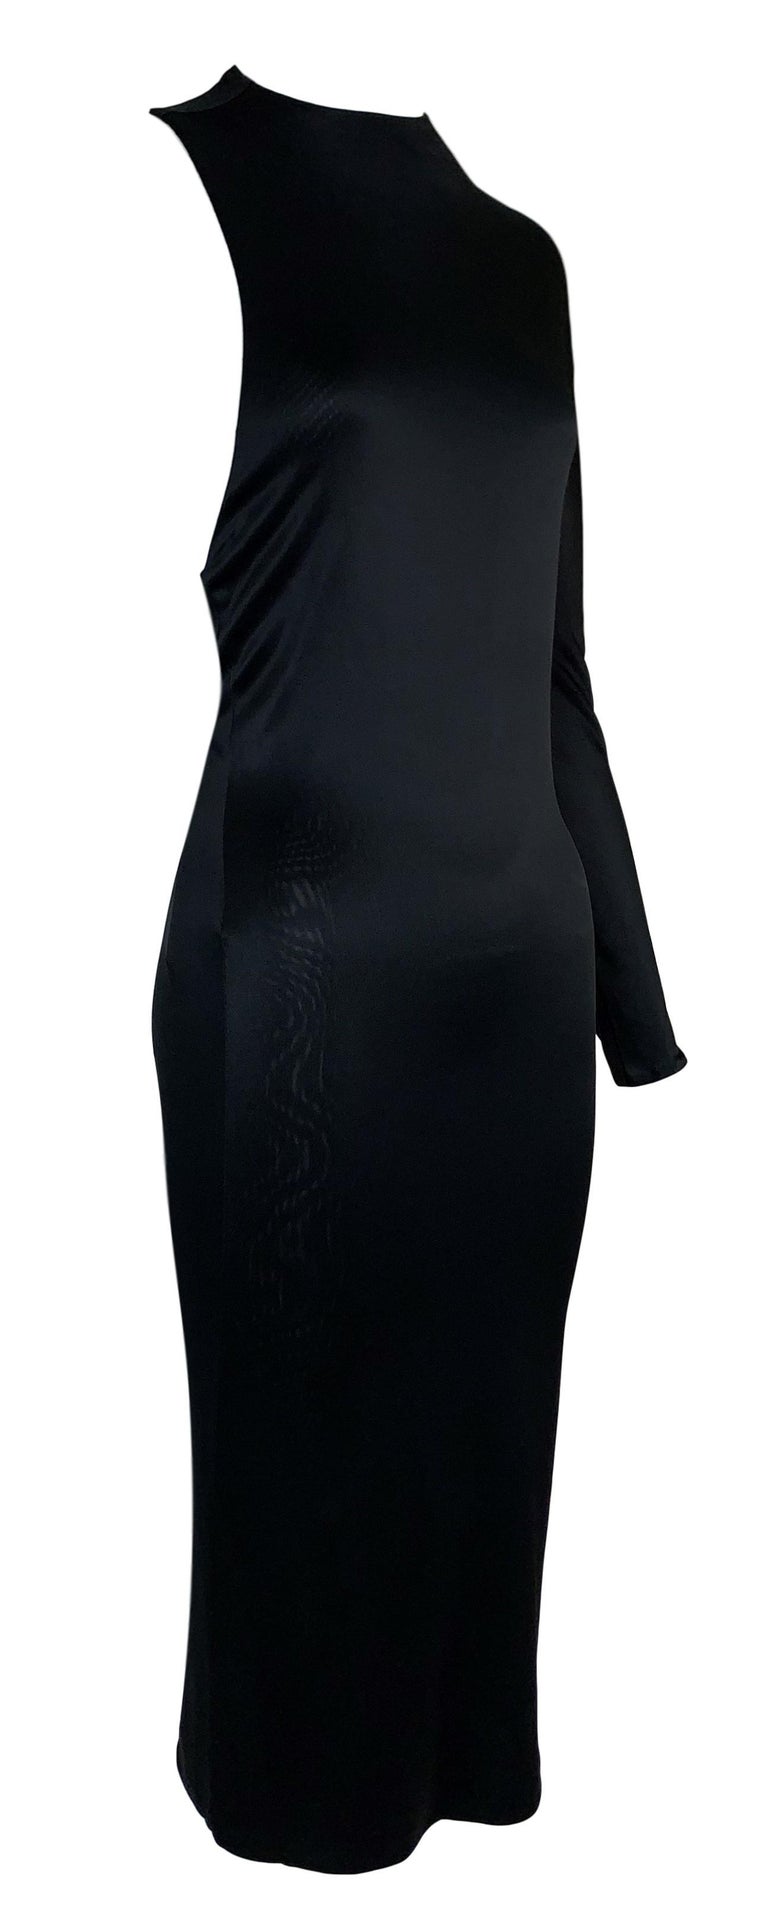 S/S 2000 Gucci Tom Ford Black One Arm Plunging Side and Back Slinky ...